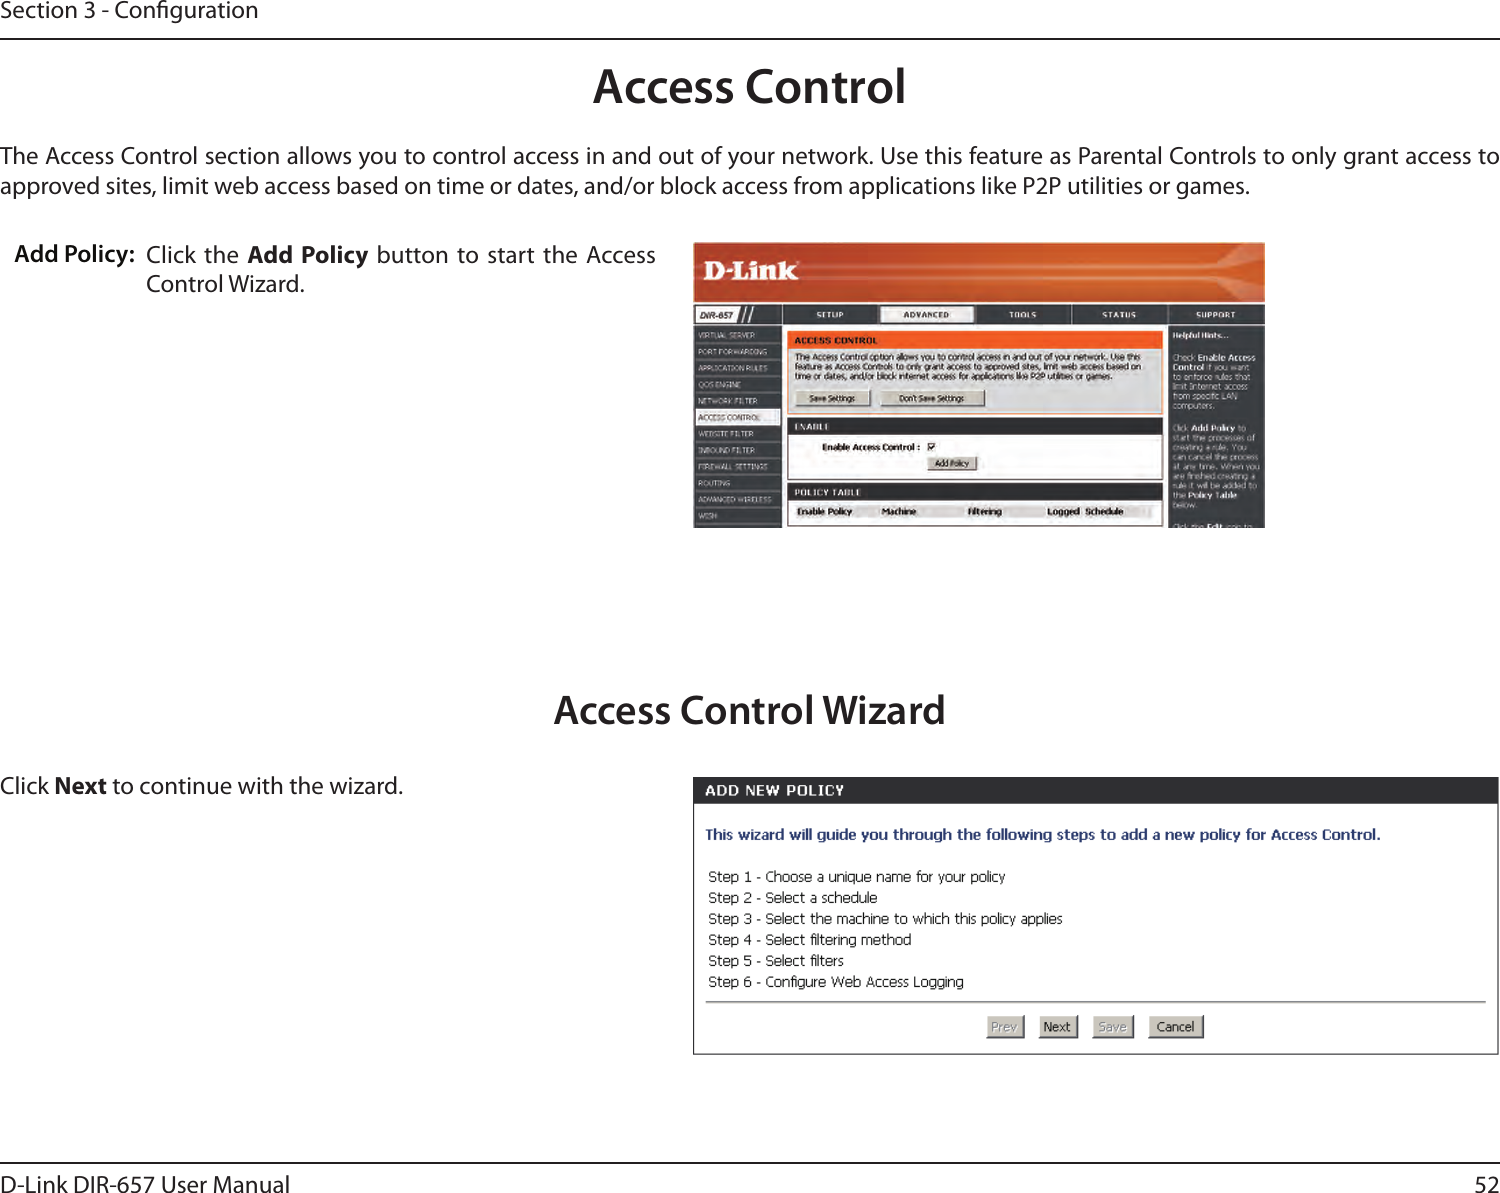 52D-Link DIR-657 User ManualSection 3 - CongurationAccess ControlClick the  Add  Policy button to  start  the Access Control Wizard. Add Policy:The Access Control section allows you to control access in and out of your network. Use this feature as Parental Controls to only grant access to approved sites, limit web access based on time or dates, and/or block access from applications like P2P utilities or games.Click Next to continue with the wizard.Access Control Wizard